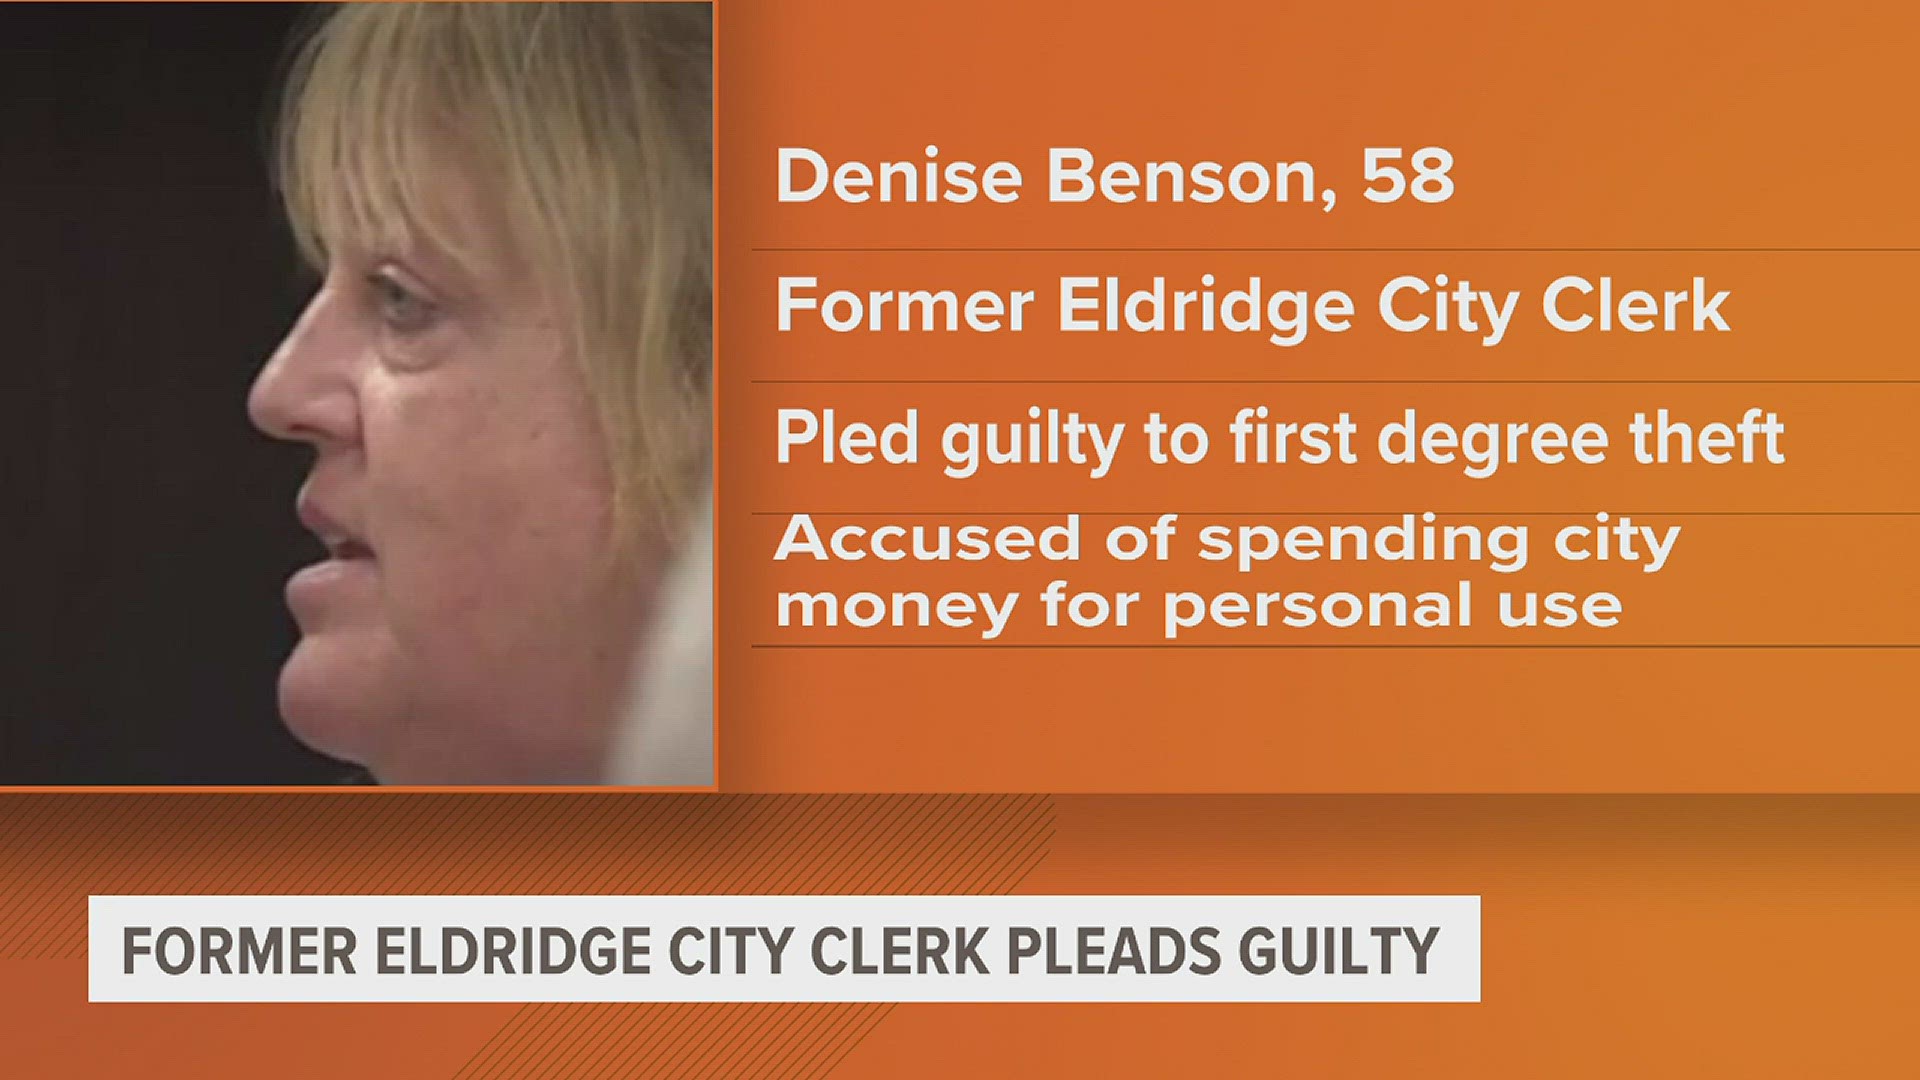 Denise Benson was charged back in June and is accused of using over $76,000 in city funds for personal use.